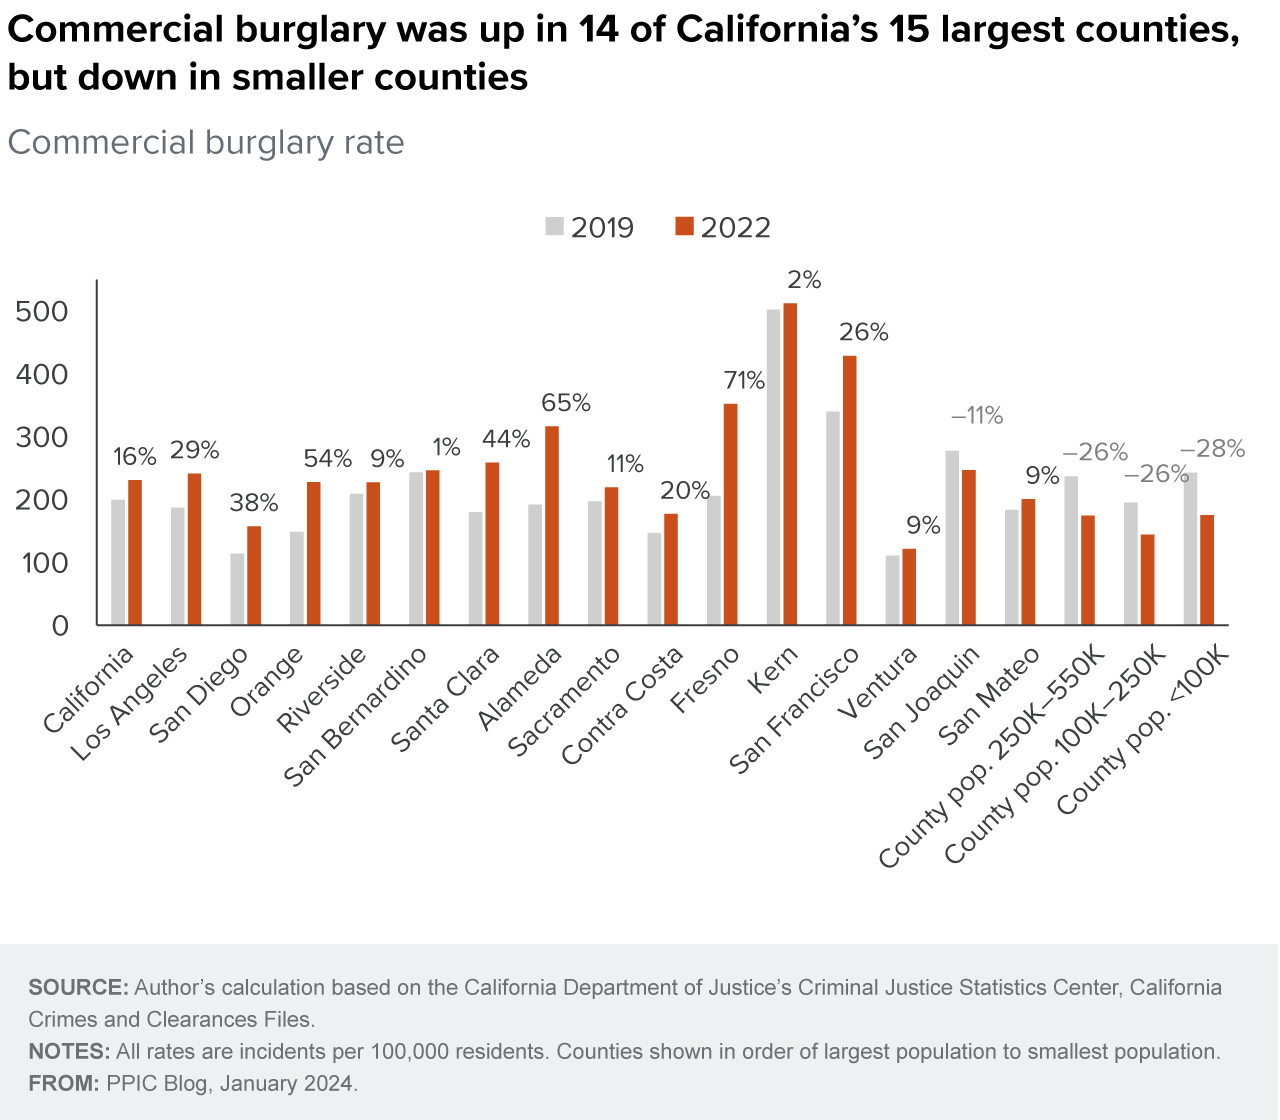 figure - Commercial burglary was up in 14 of California's 15 largest counties, but down in smaller counties